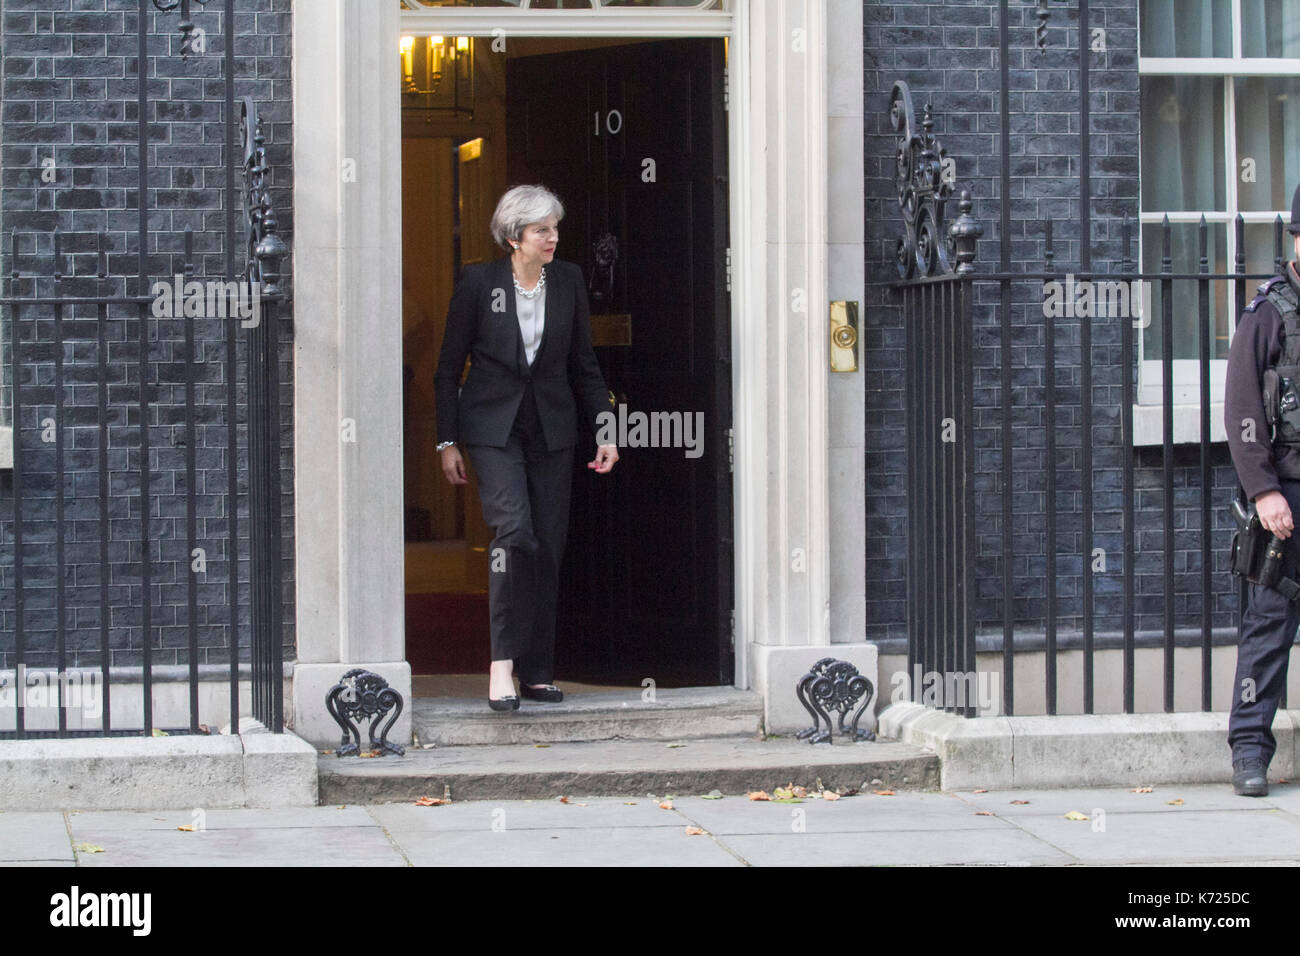 London, UK. 14th Sep, 2017. British Prime Minister Theresa May welcomes Najib Razak Prime Minister of Malaysia on the steps of No 10 Downing Street Credit: amer ghazzal/Alamy Live News Stock Photo